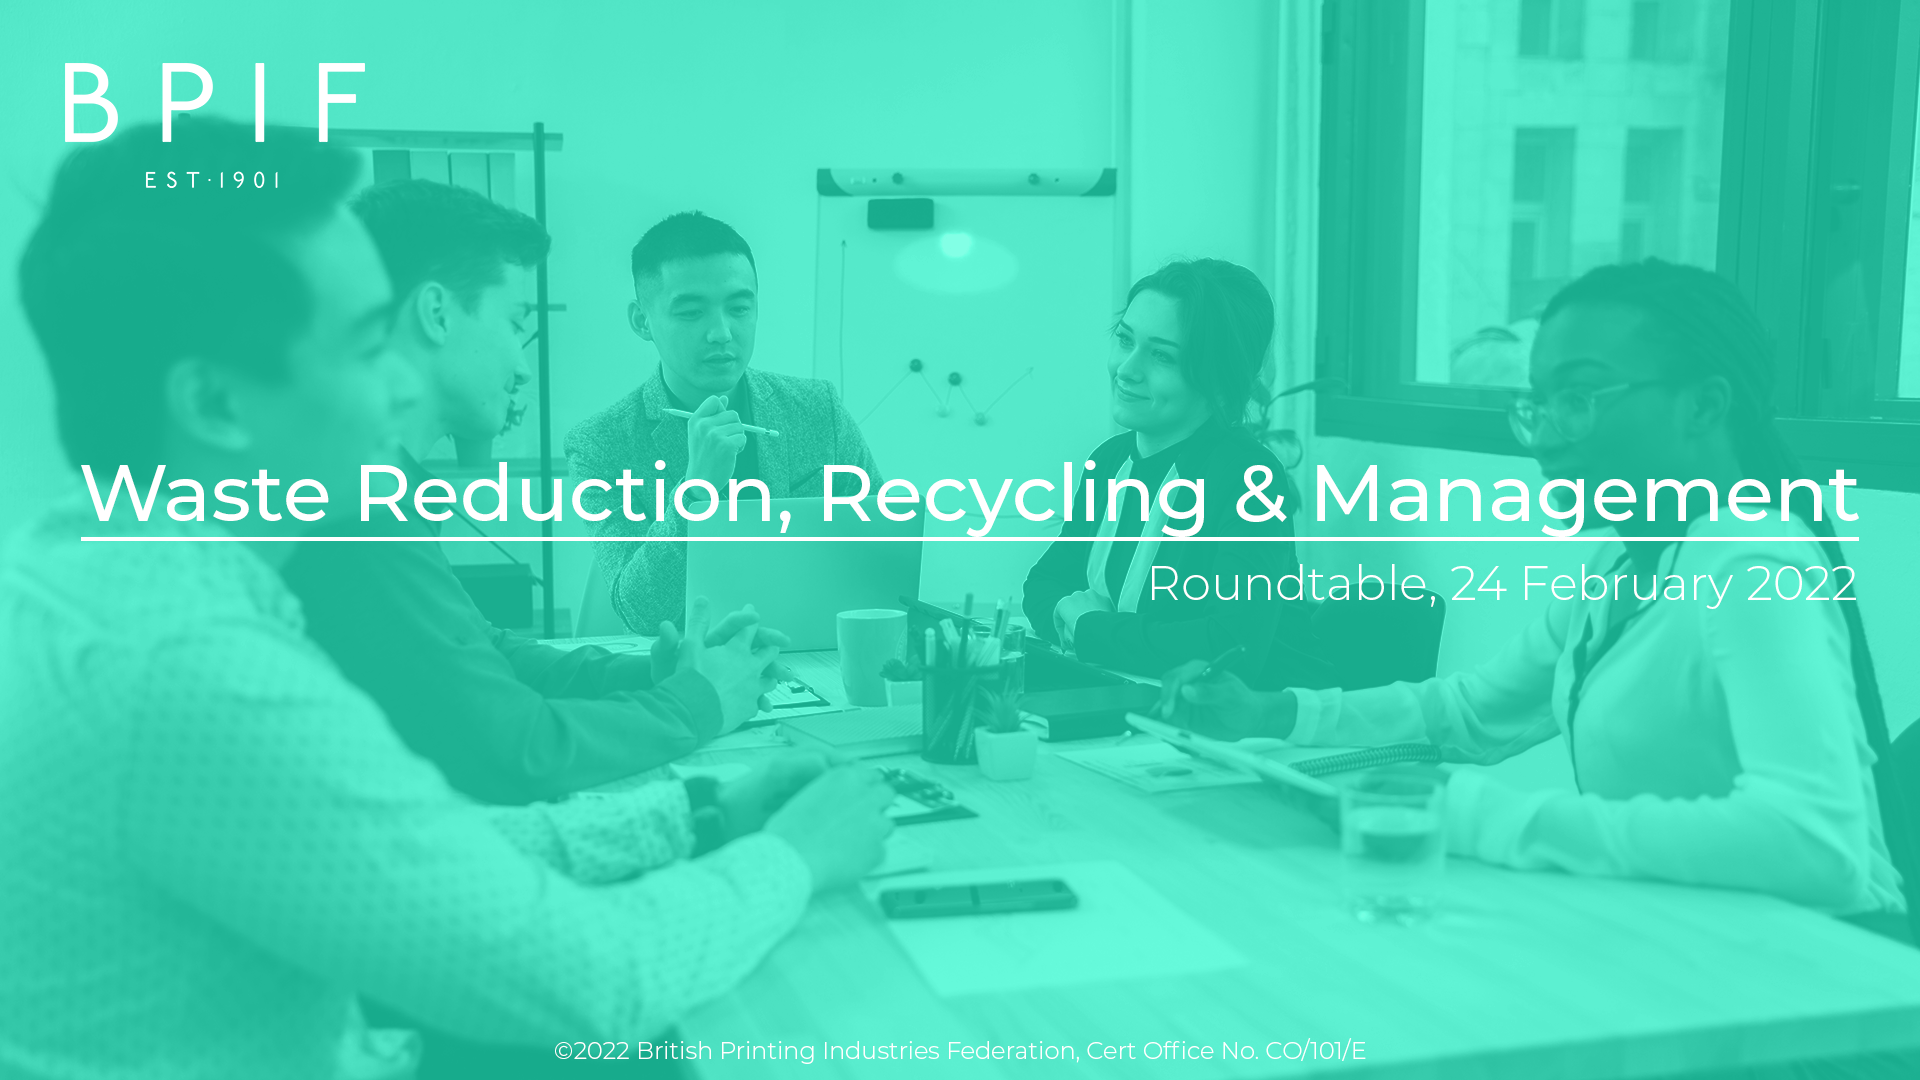 BPIF Waste Reduction, Recycling & Management Roundtable